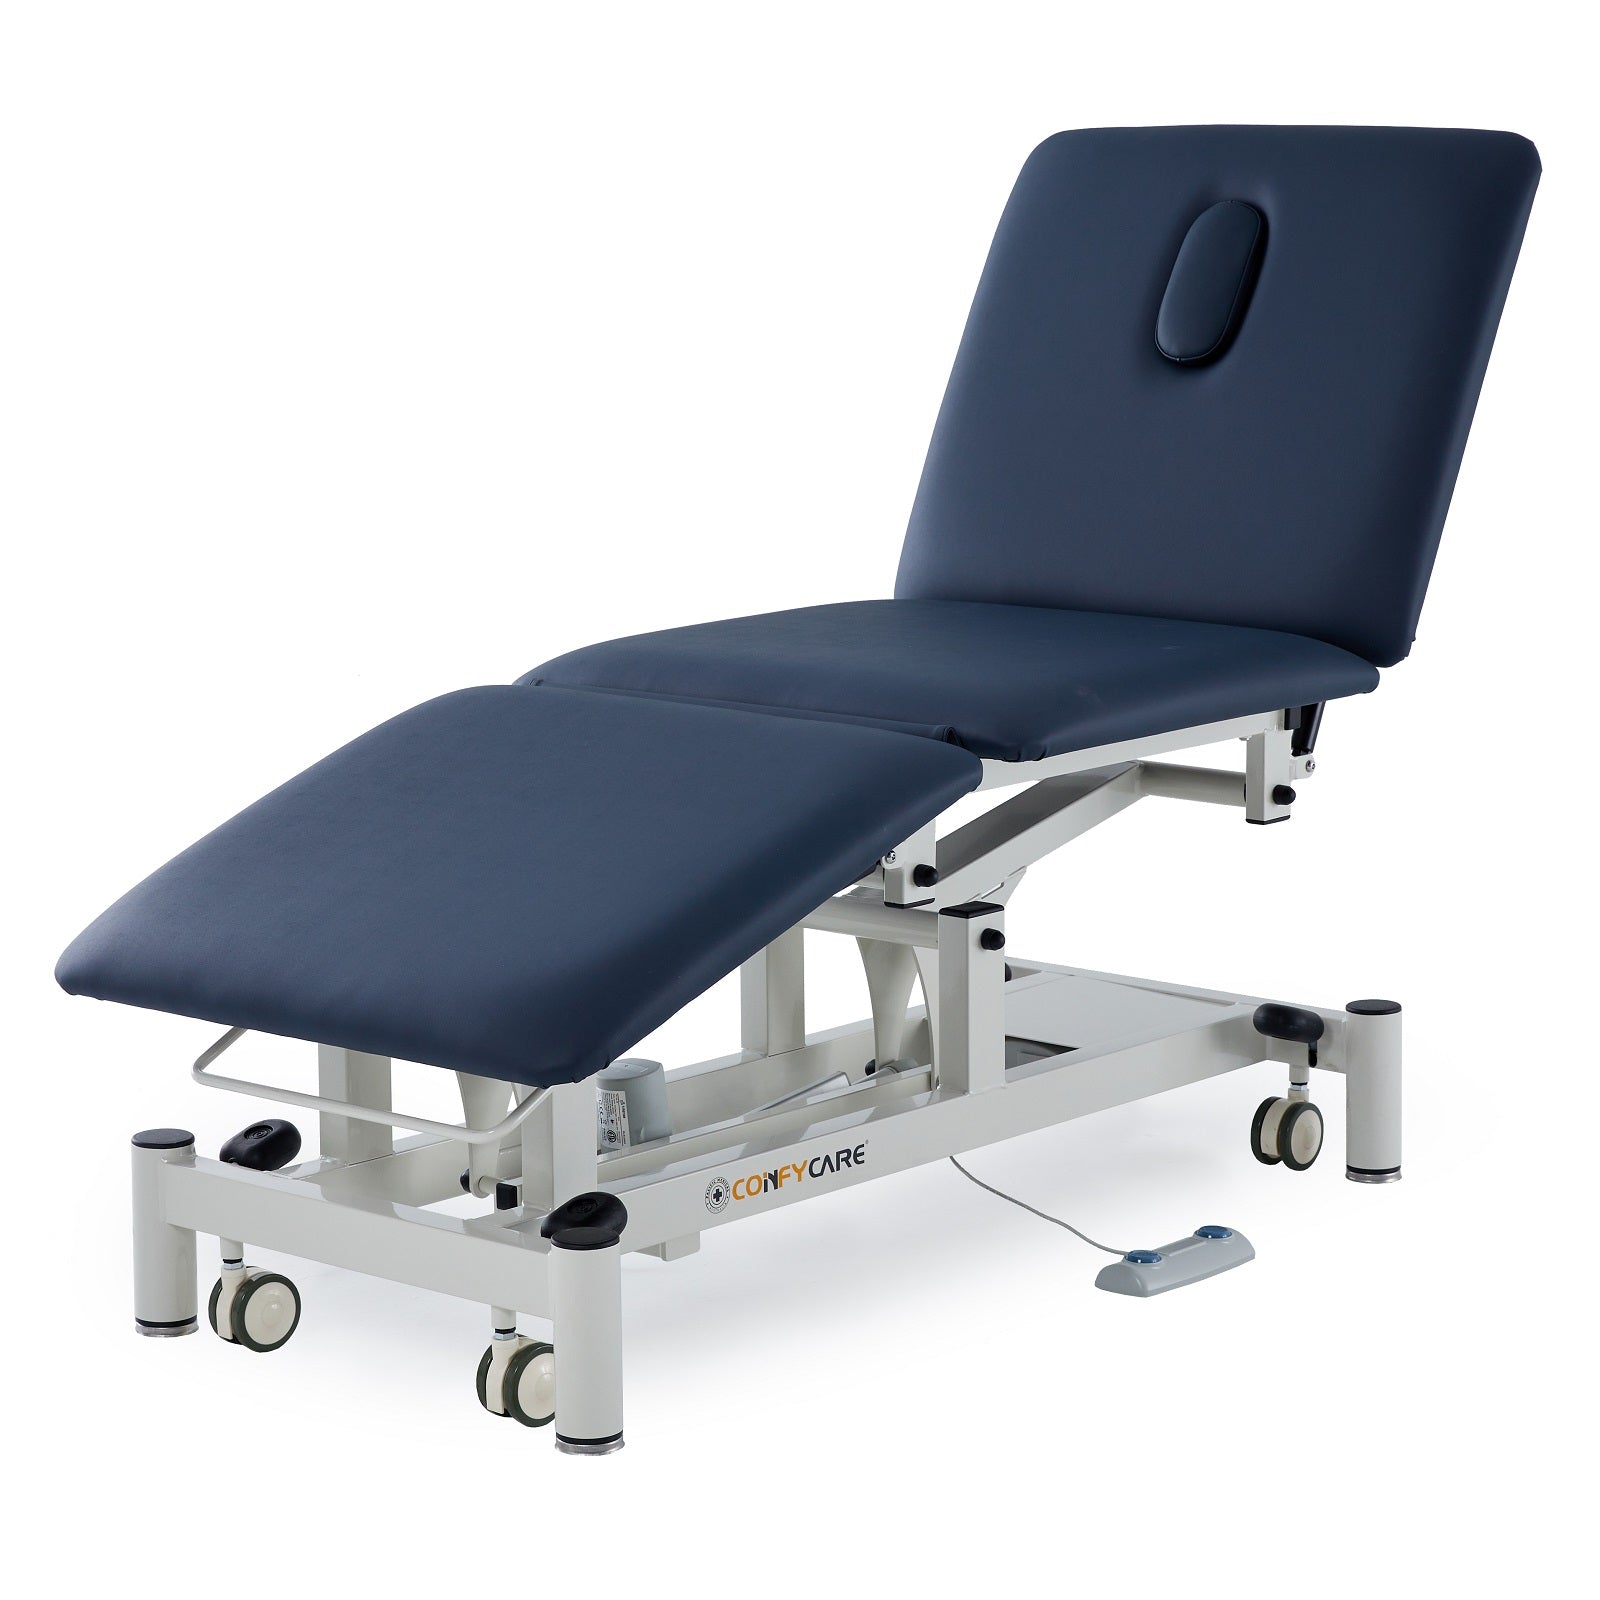 Unlocking the Benefits of the Three Section Medical Treatment Couch: A Comprehensive Guide for Those in Need of Aged Care and Mobility Aid Solutions